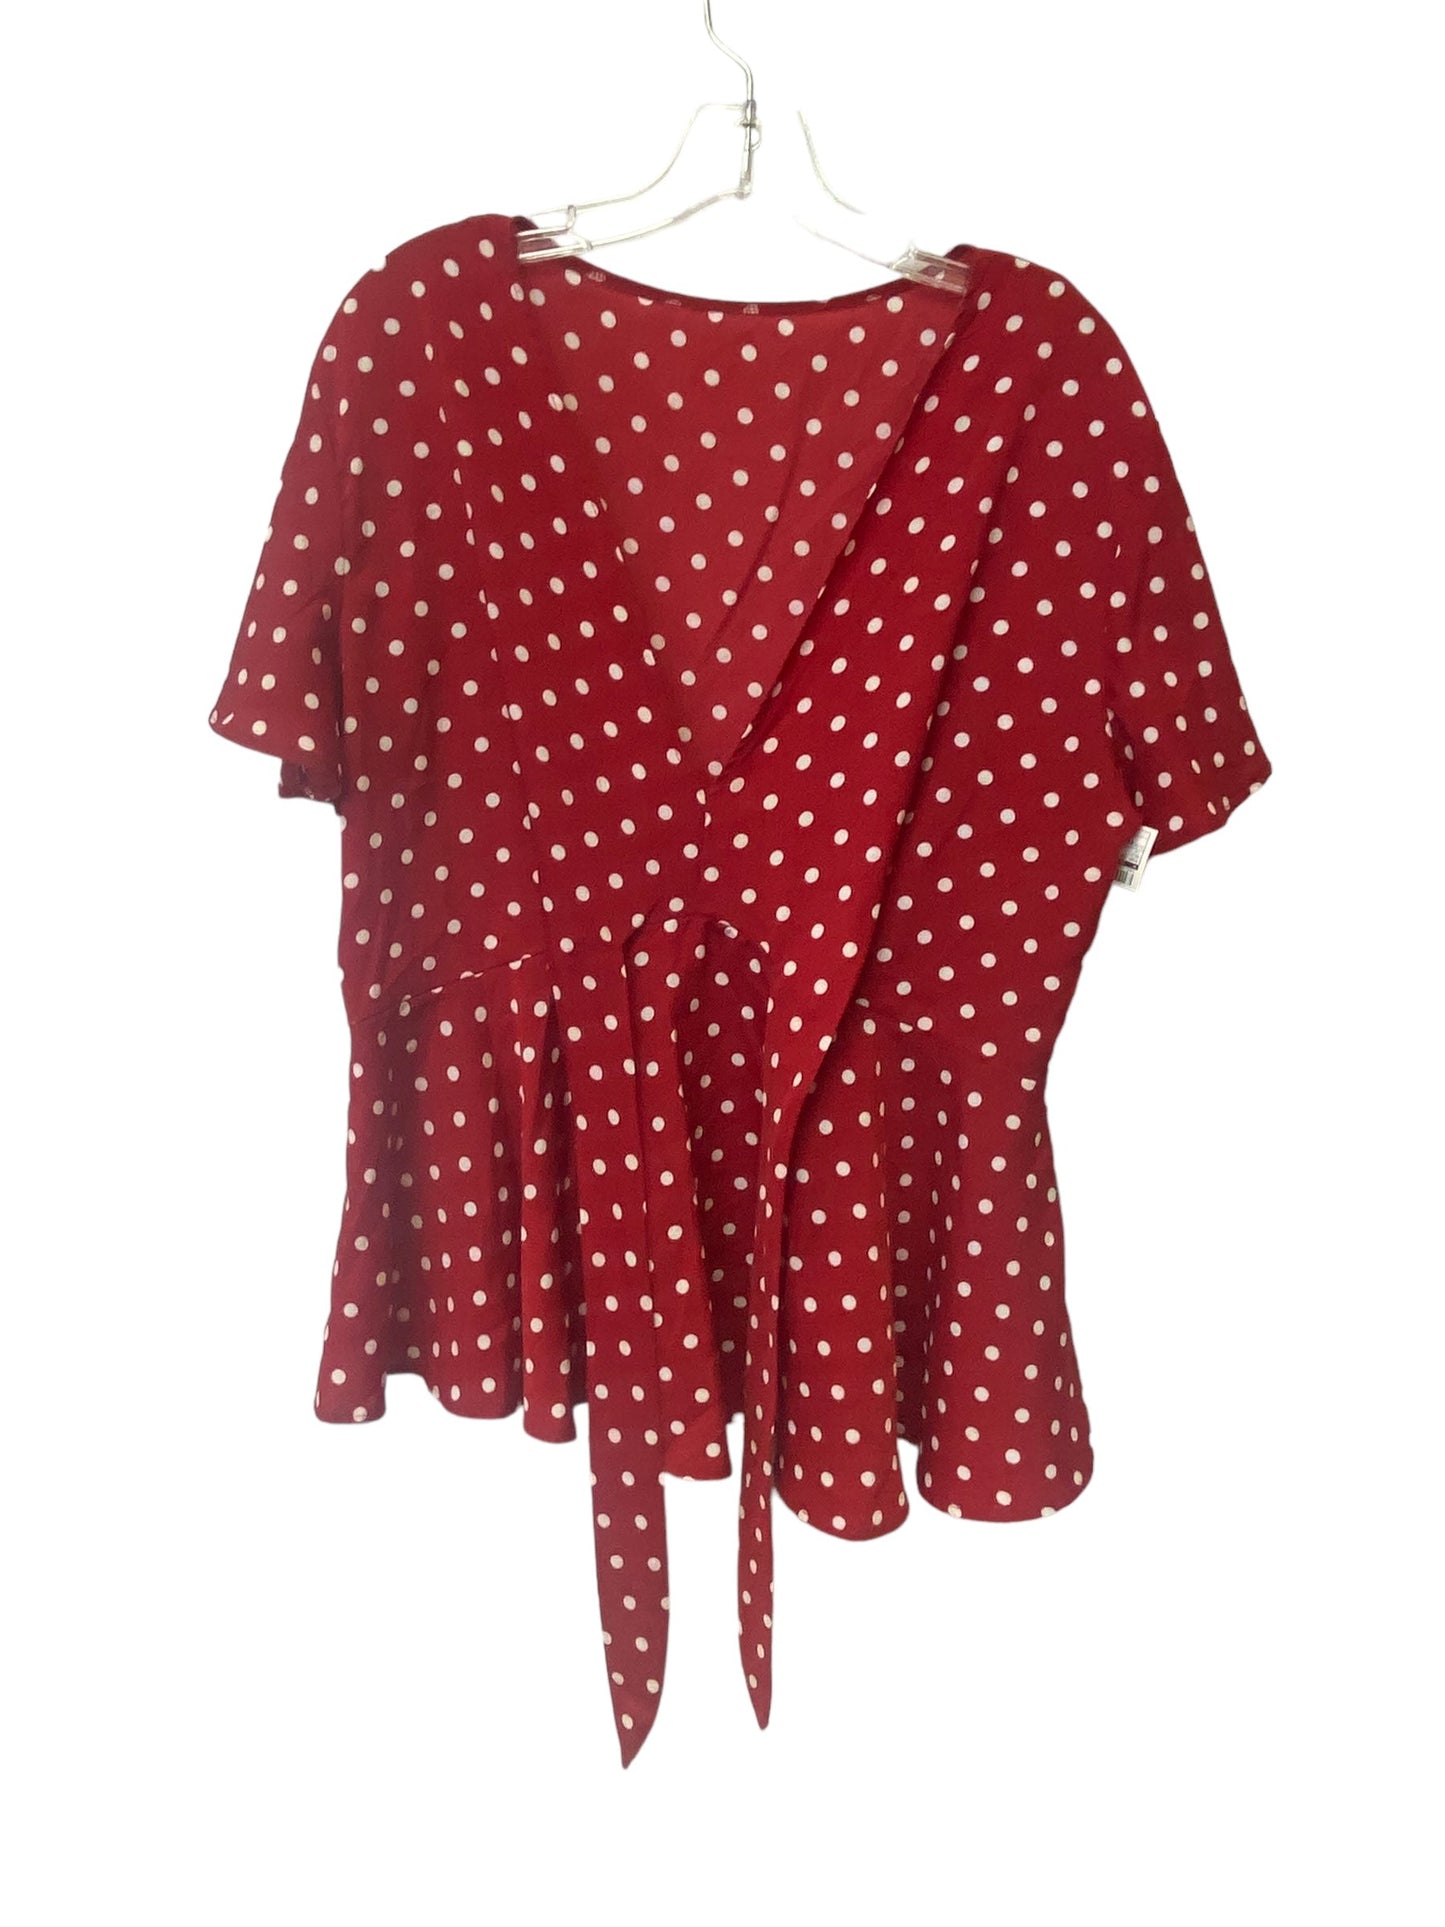 Red Top Short Sleeve Clothes Mentor, Size 1x